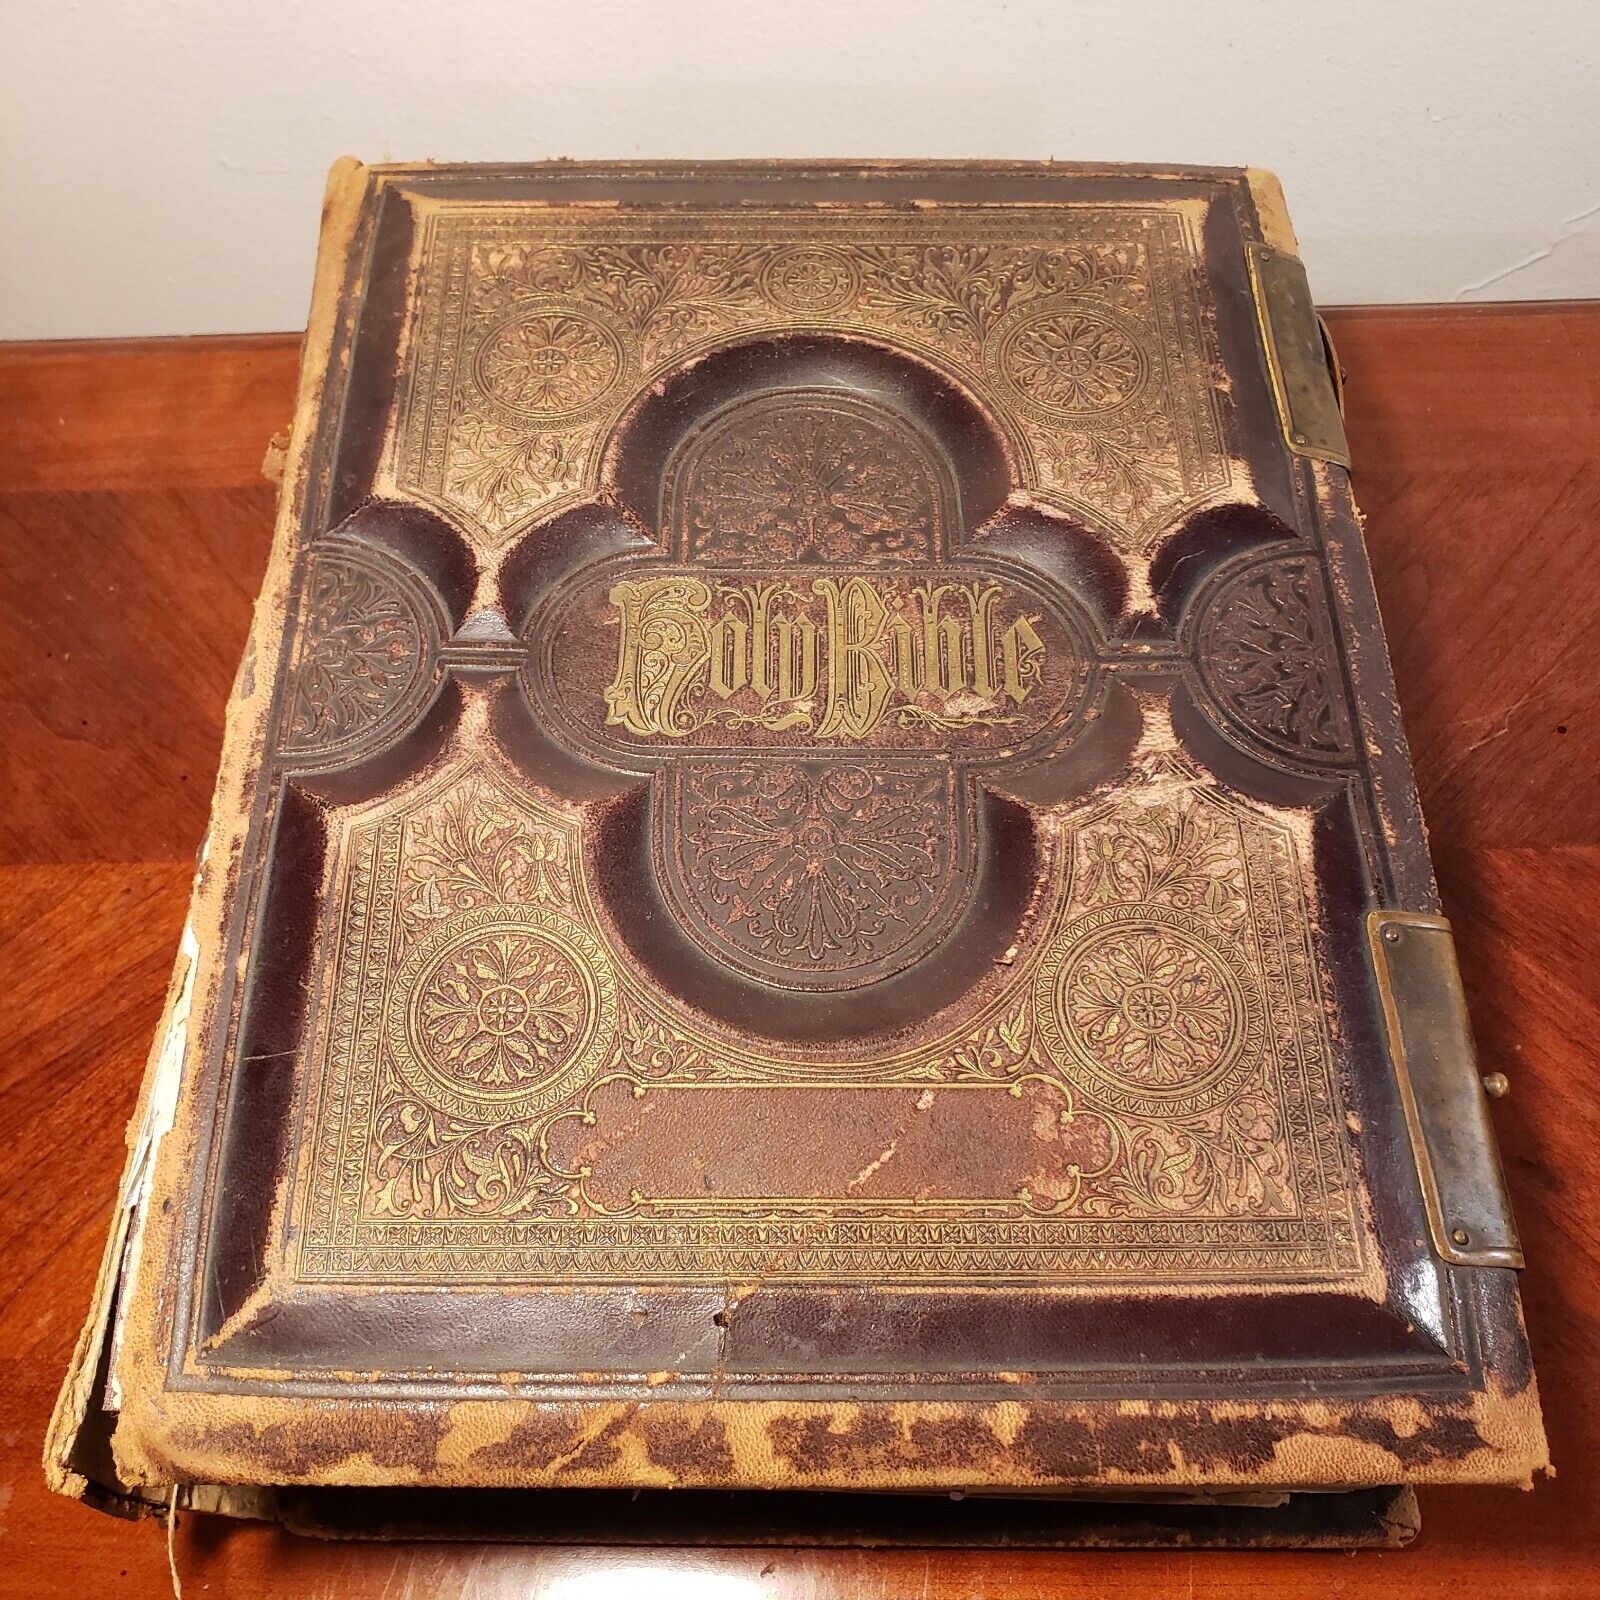 Large Antique 1873 Family Bible Ornate Leather With Copper Clasps 151 Years Old